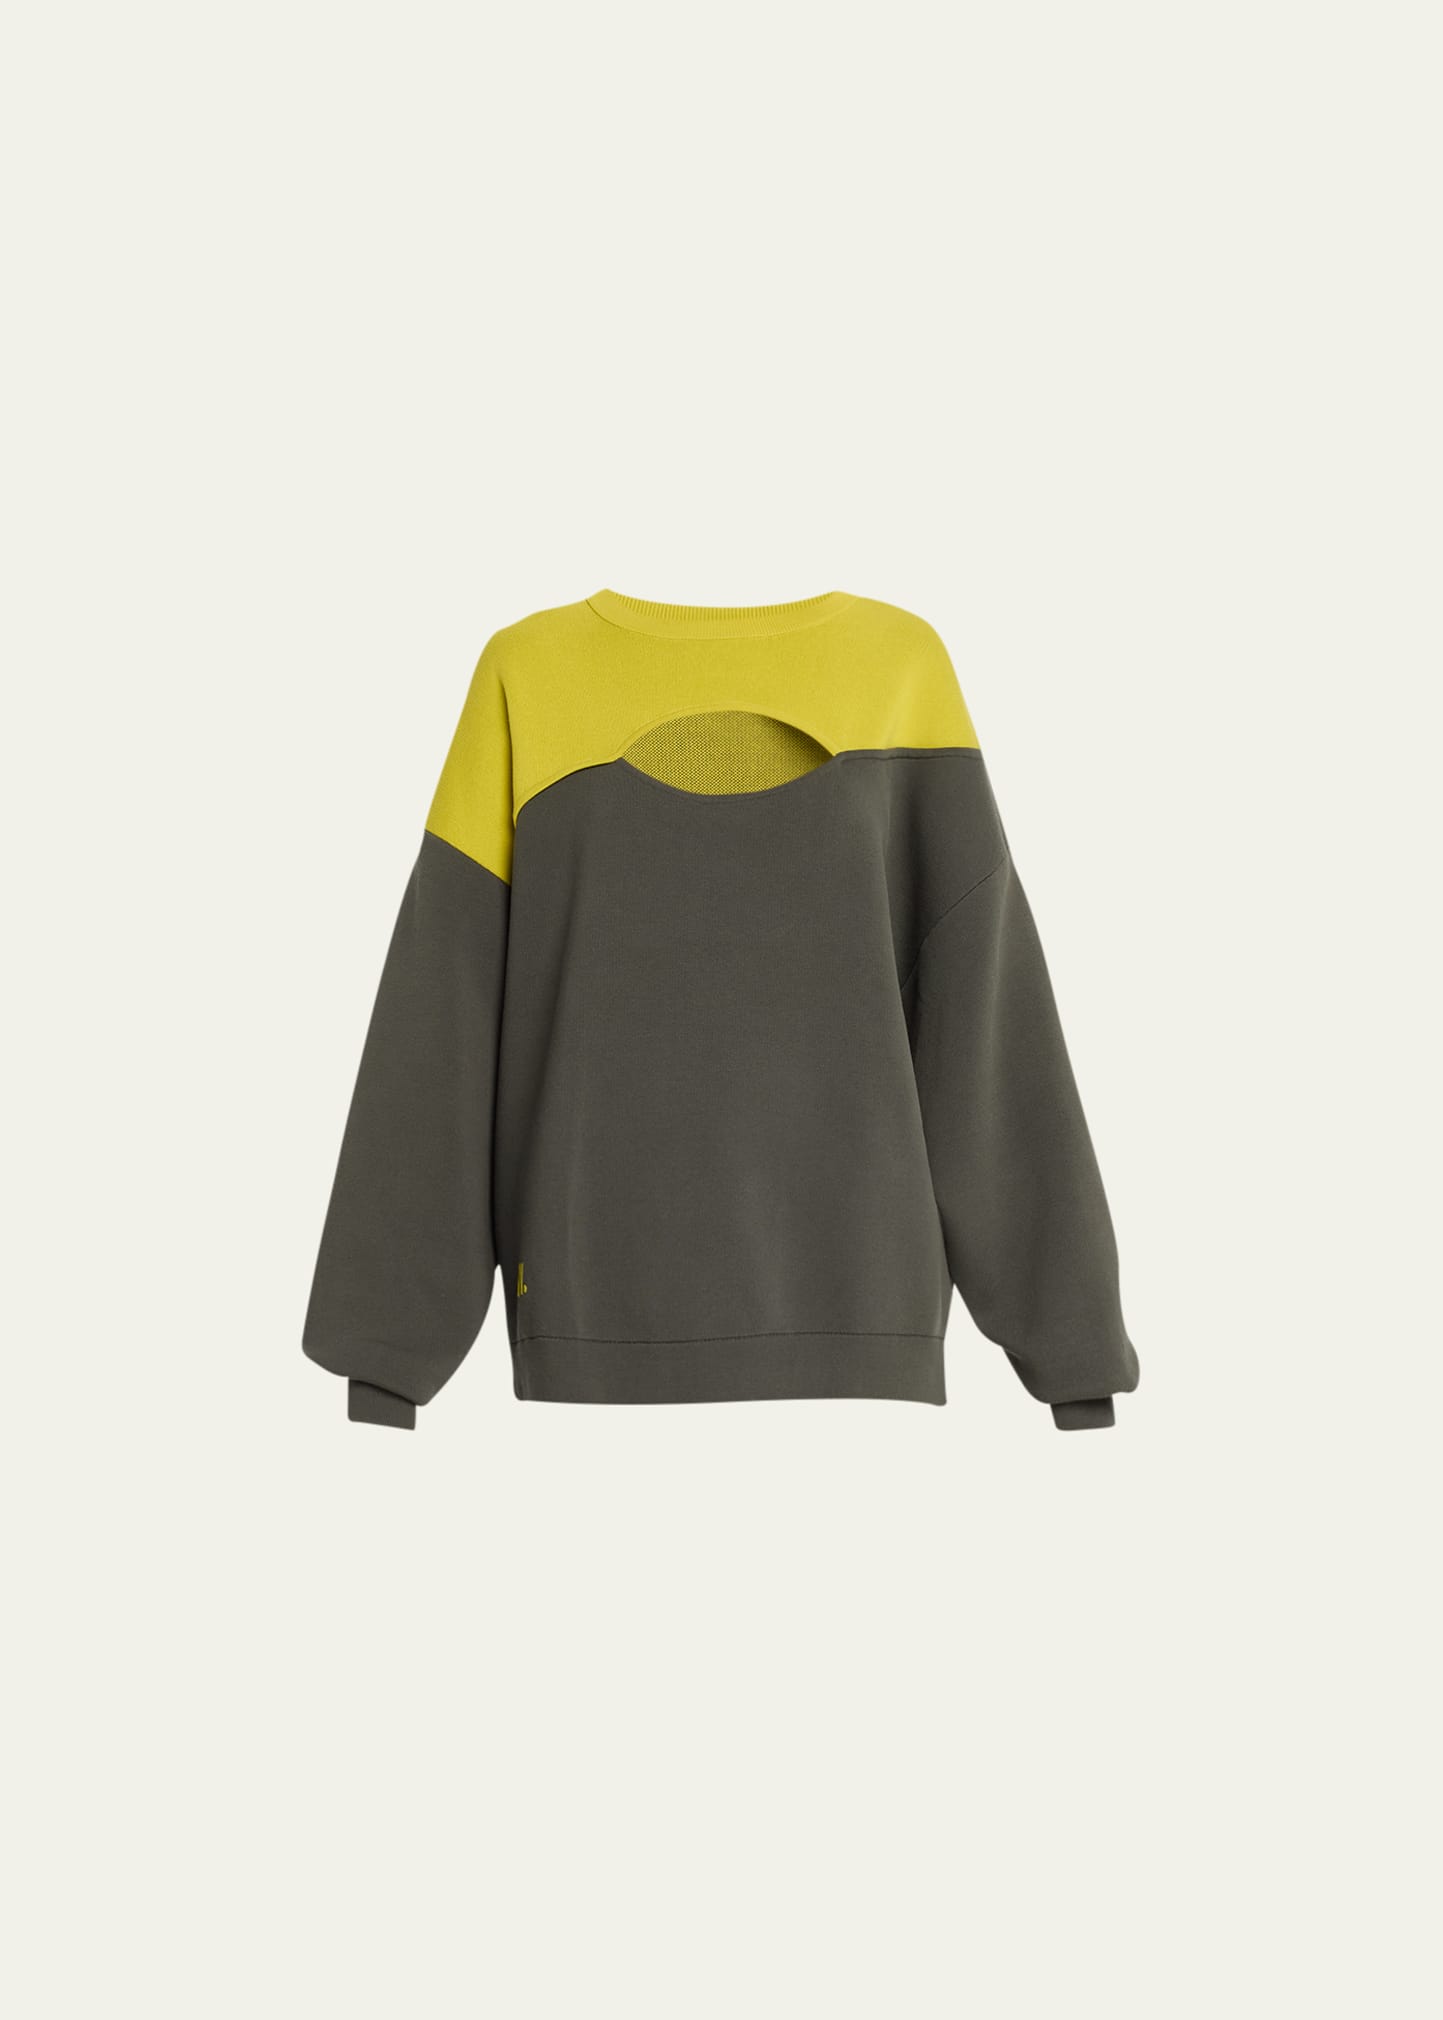 Nagnata Balanced Crewneck In Forest,chartreuse